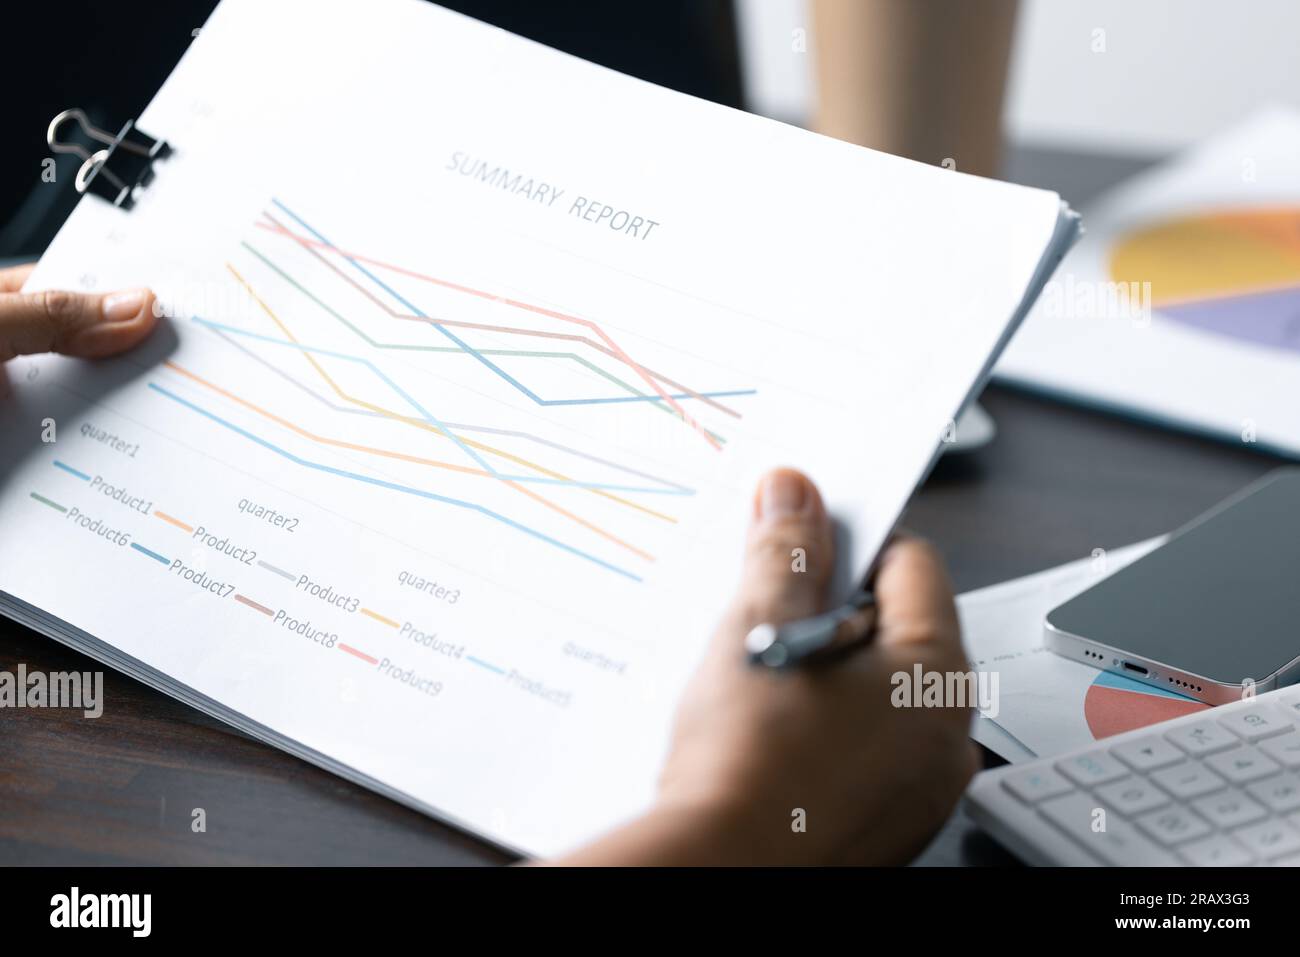 Business Data Analysis on Laptop: Financial Charts, Graphs, Reports for Successful Planning and Strategy. Professional Workplace: Analyzing Business D Stock Photo